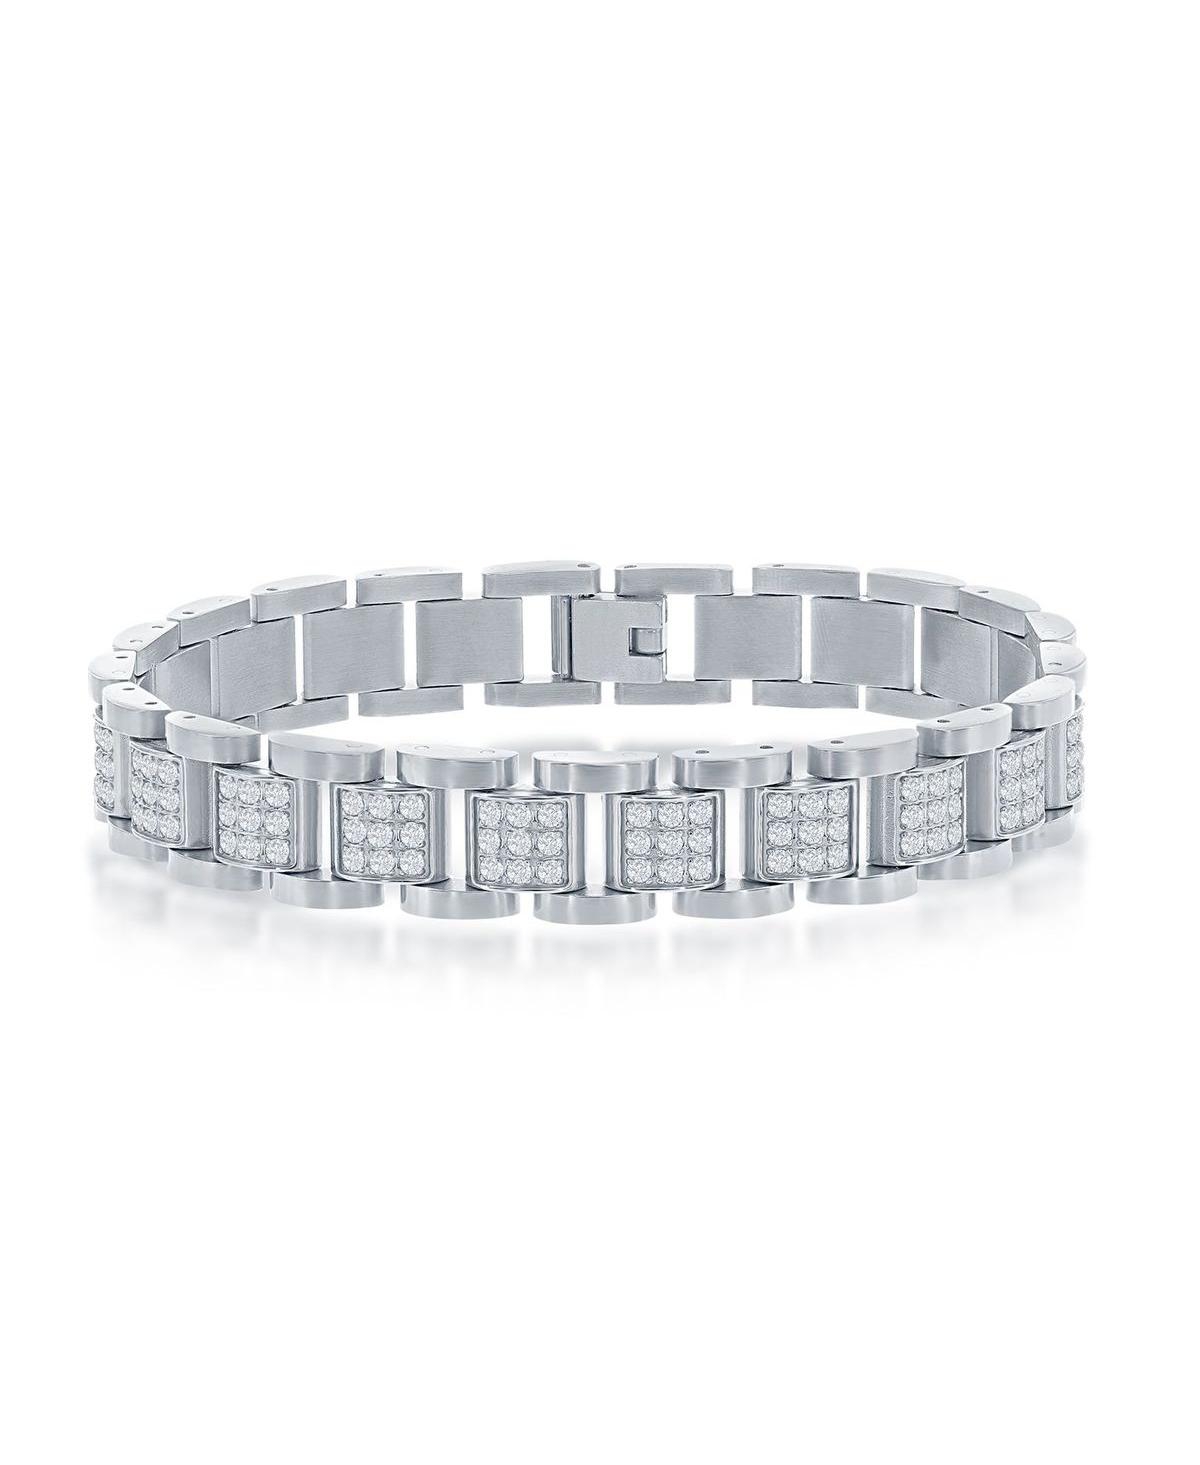 Stainless Steel Cz Square Link Bracelet - Silver